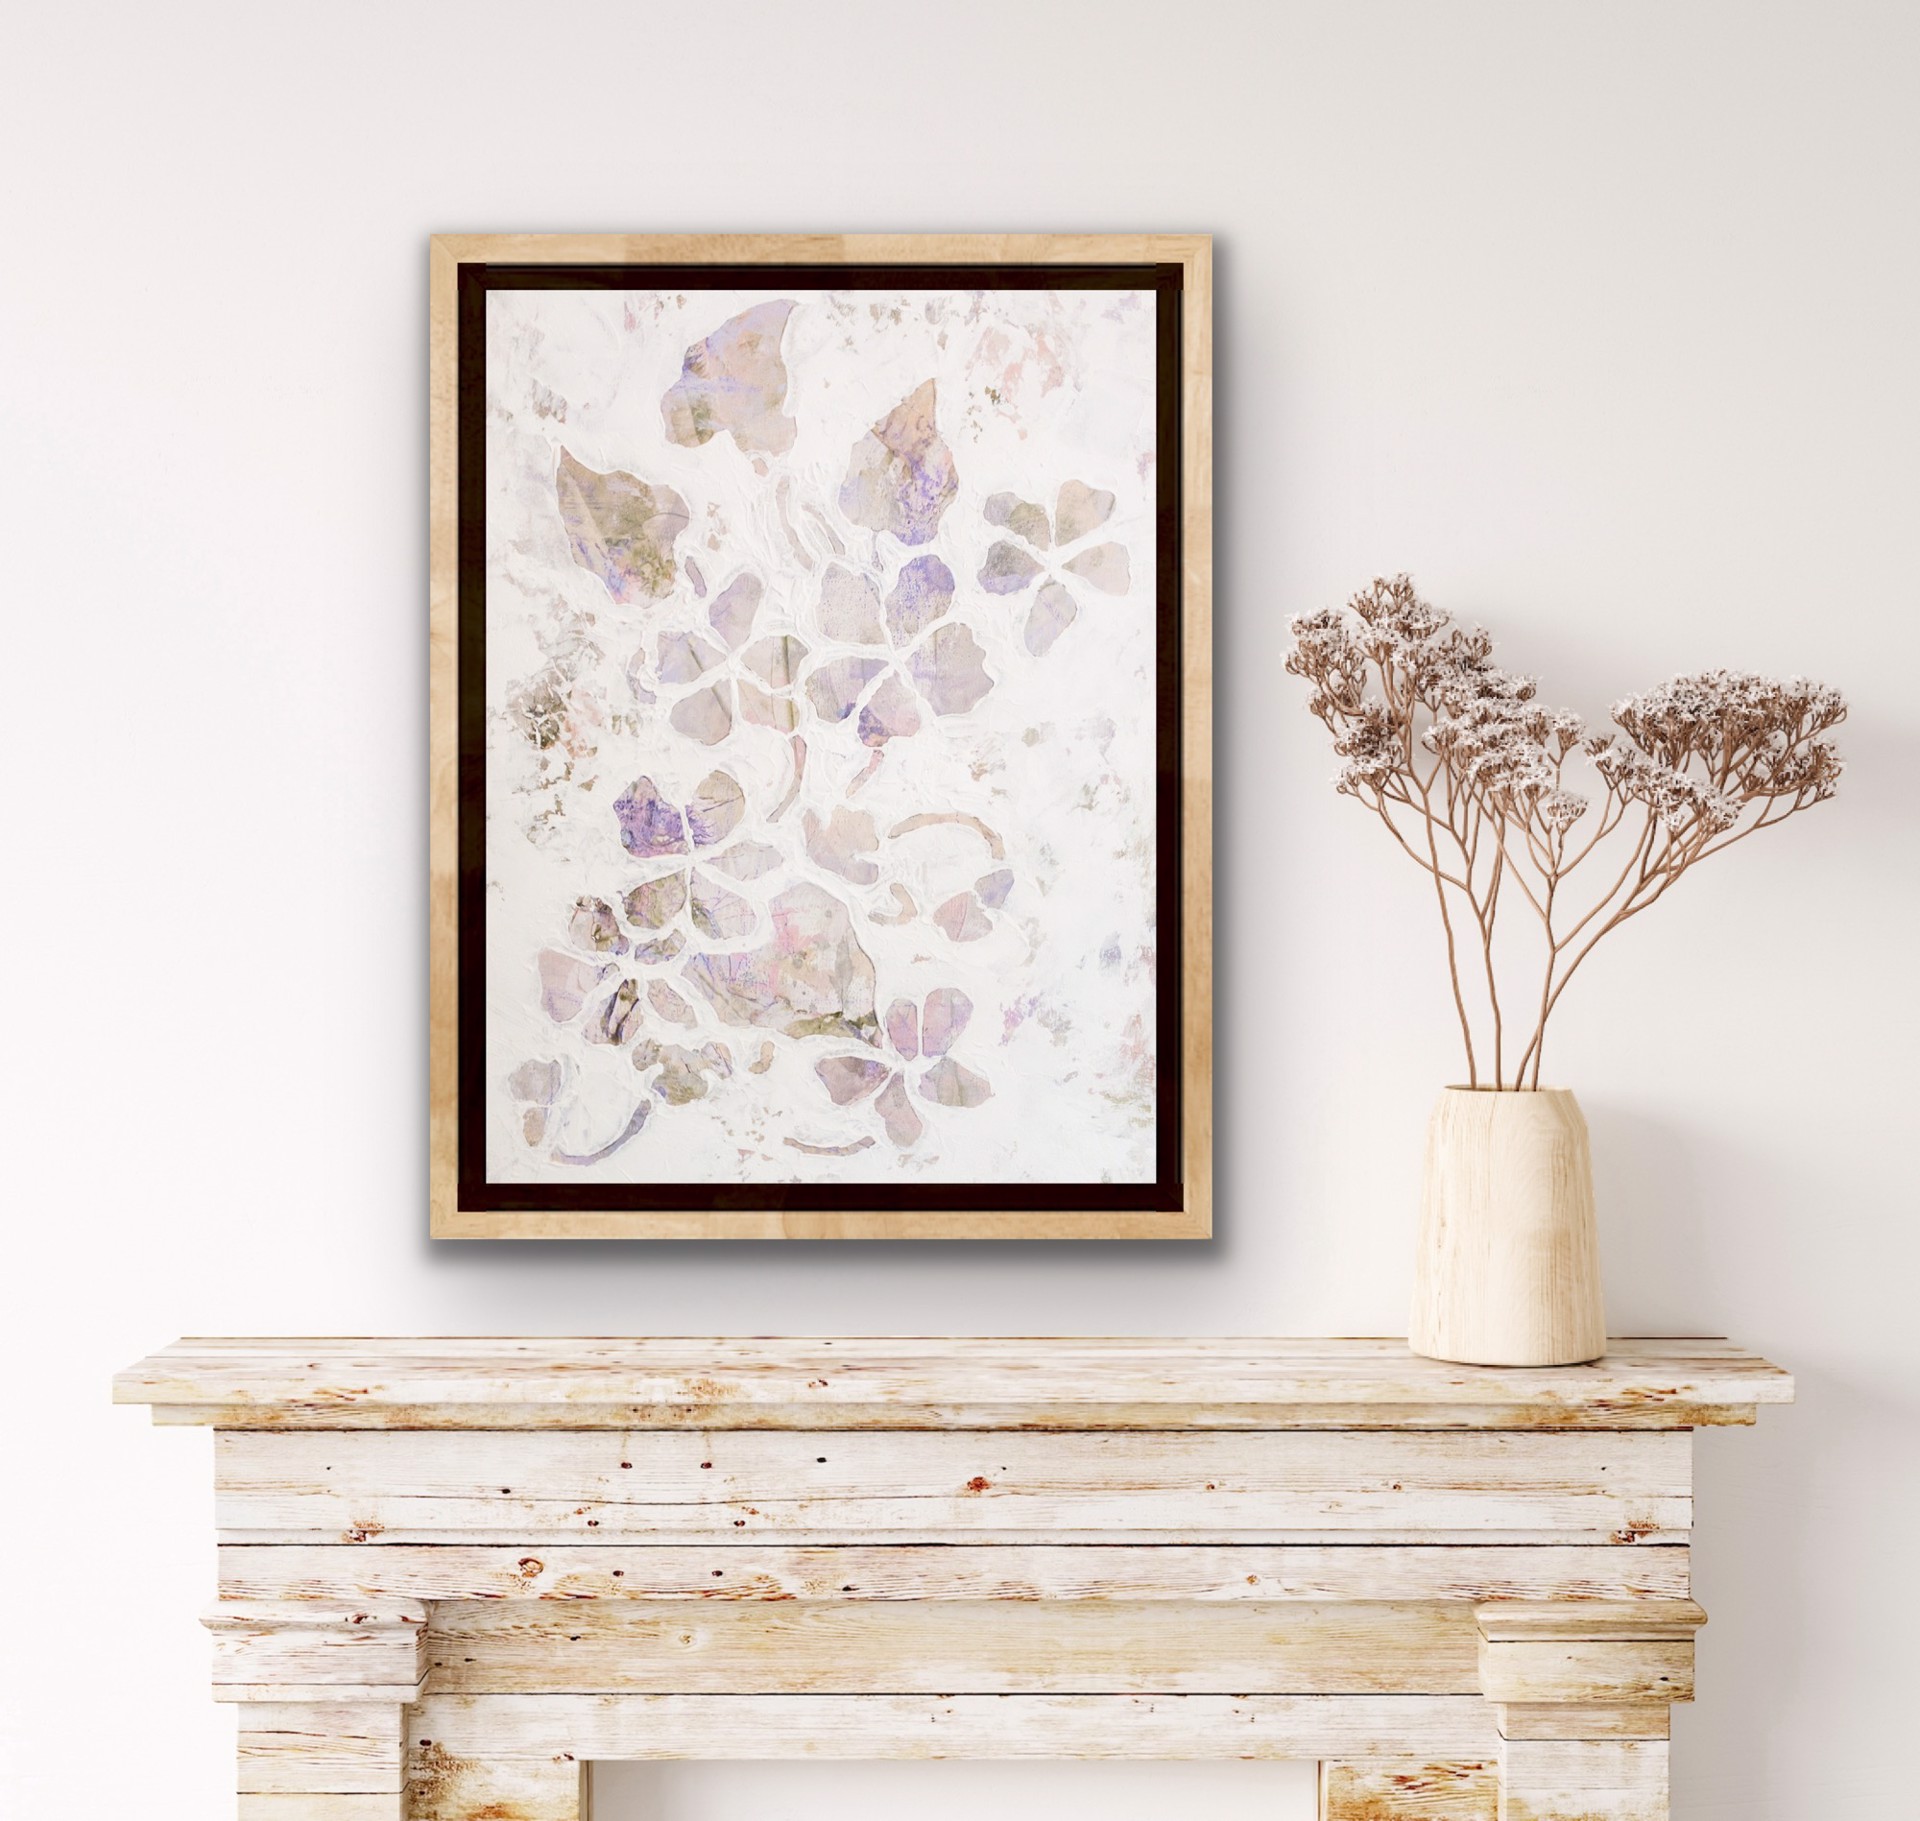 February Violets Print by Corinne Mitchell